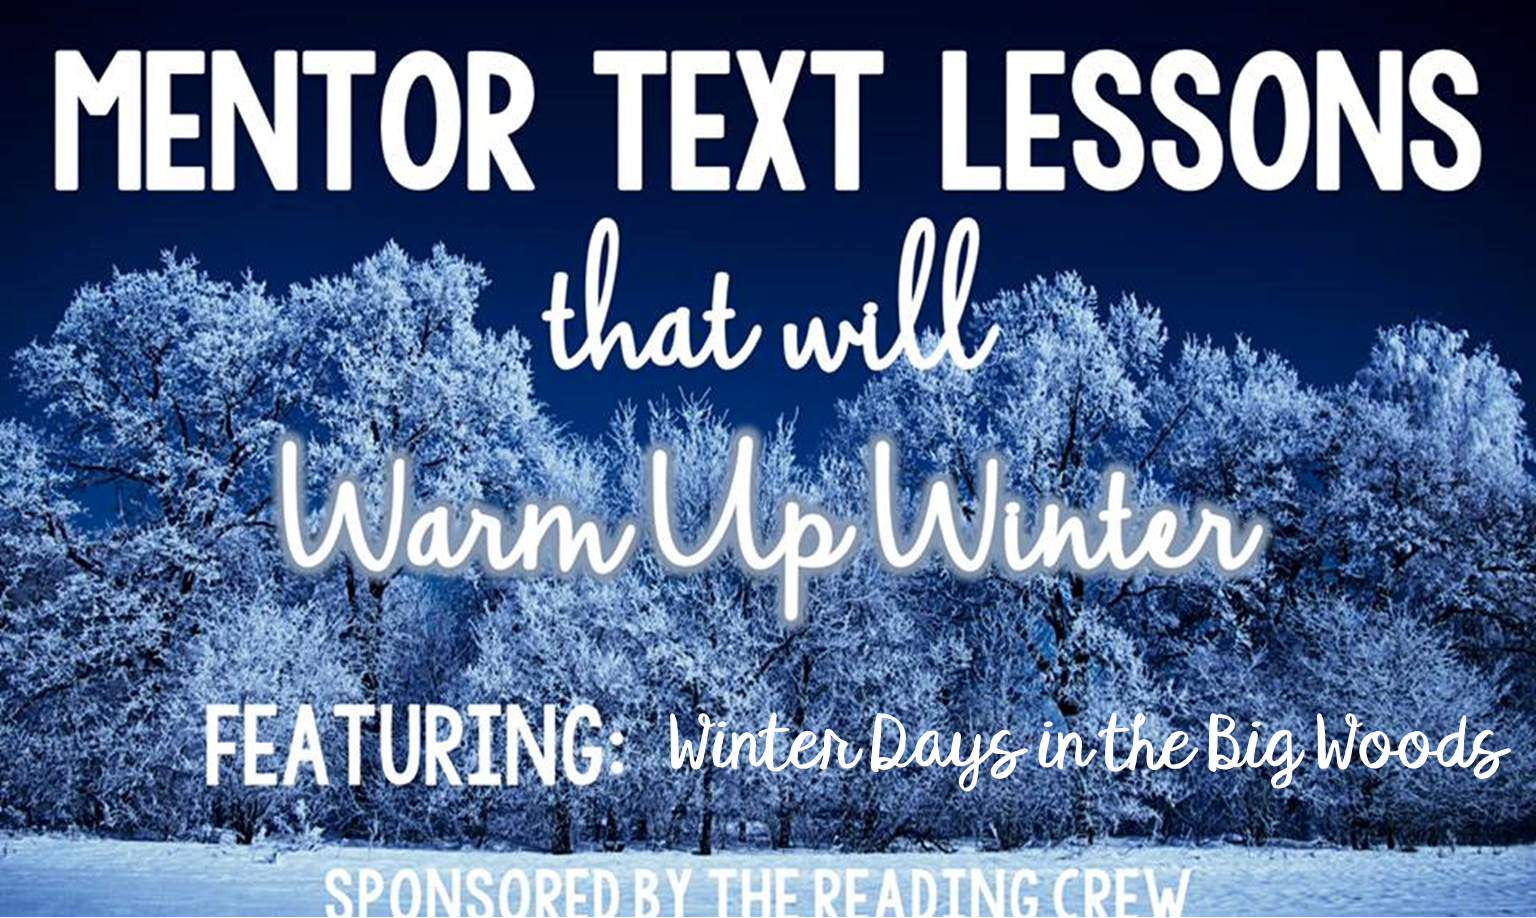 Primary grade students will love comparing and contrasting their life today to that of pioneer children using Winter Days in the Big Woods by Laura Ingalls Wilder as a mentor text.